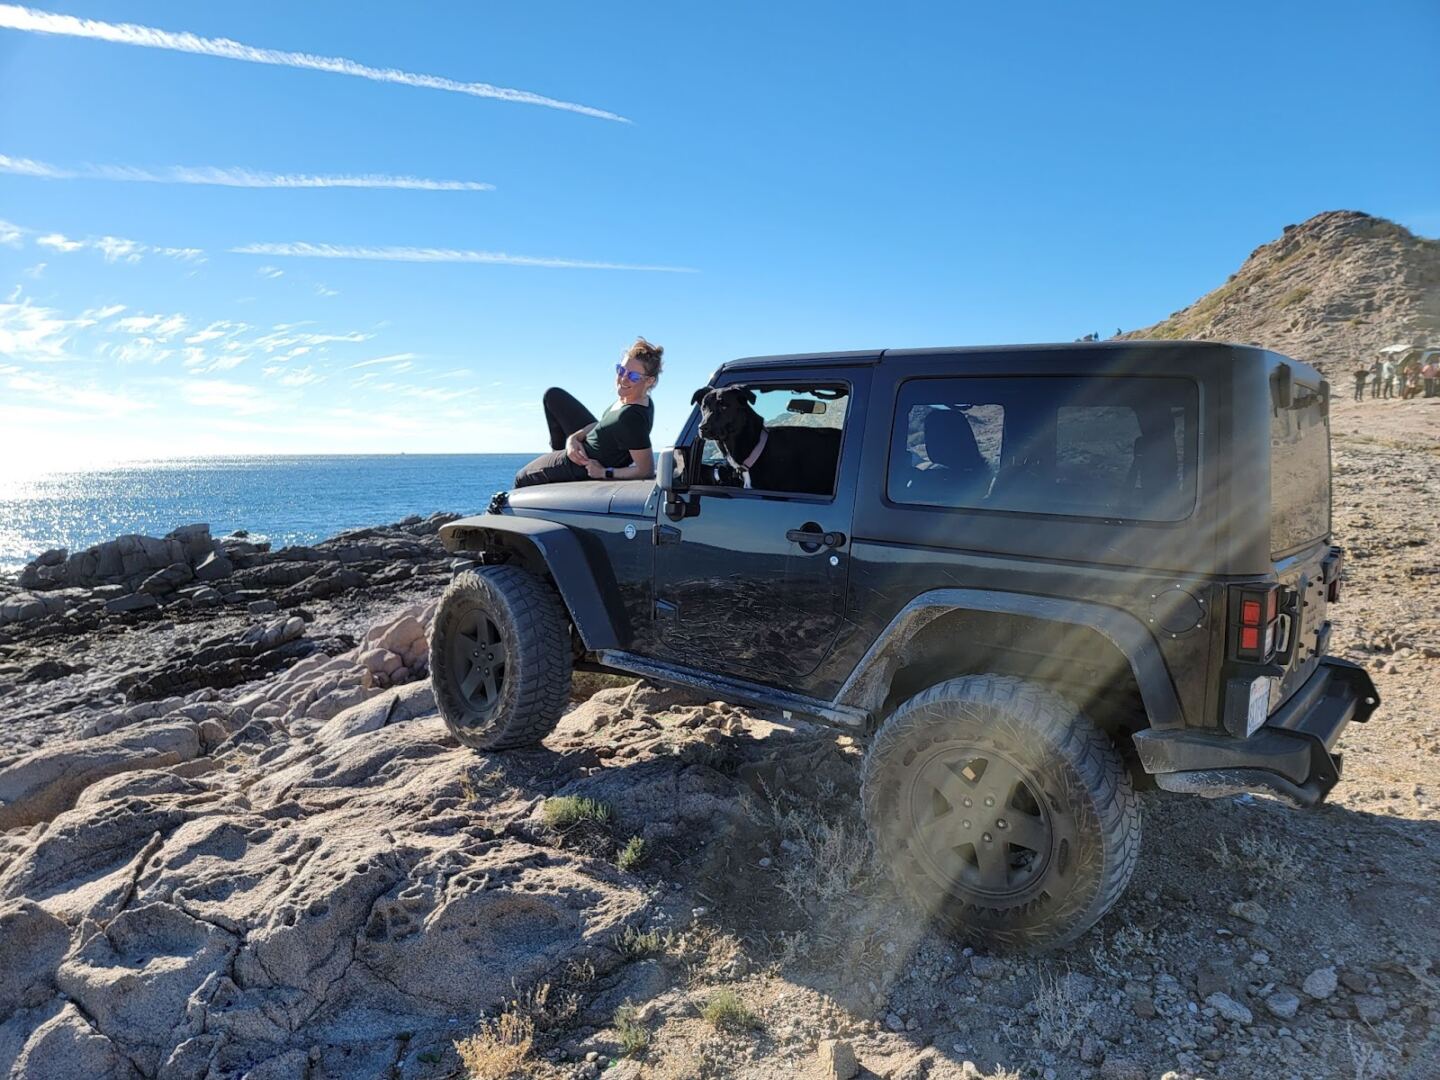 A woman sitting on the hood of a Jeep on a rocky beach, with a black dog looking out the window of the driver's seat.